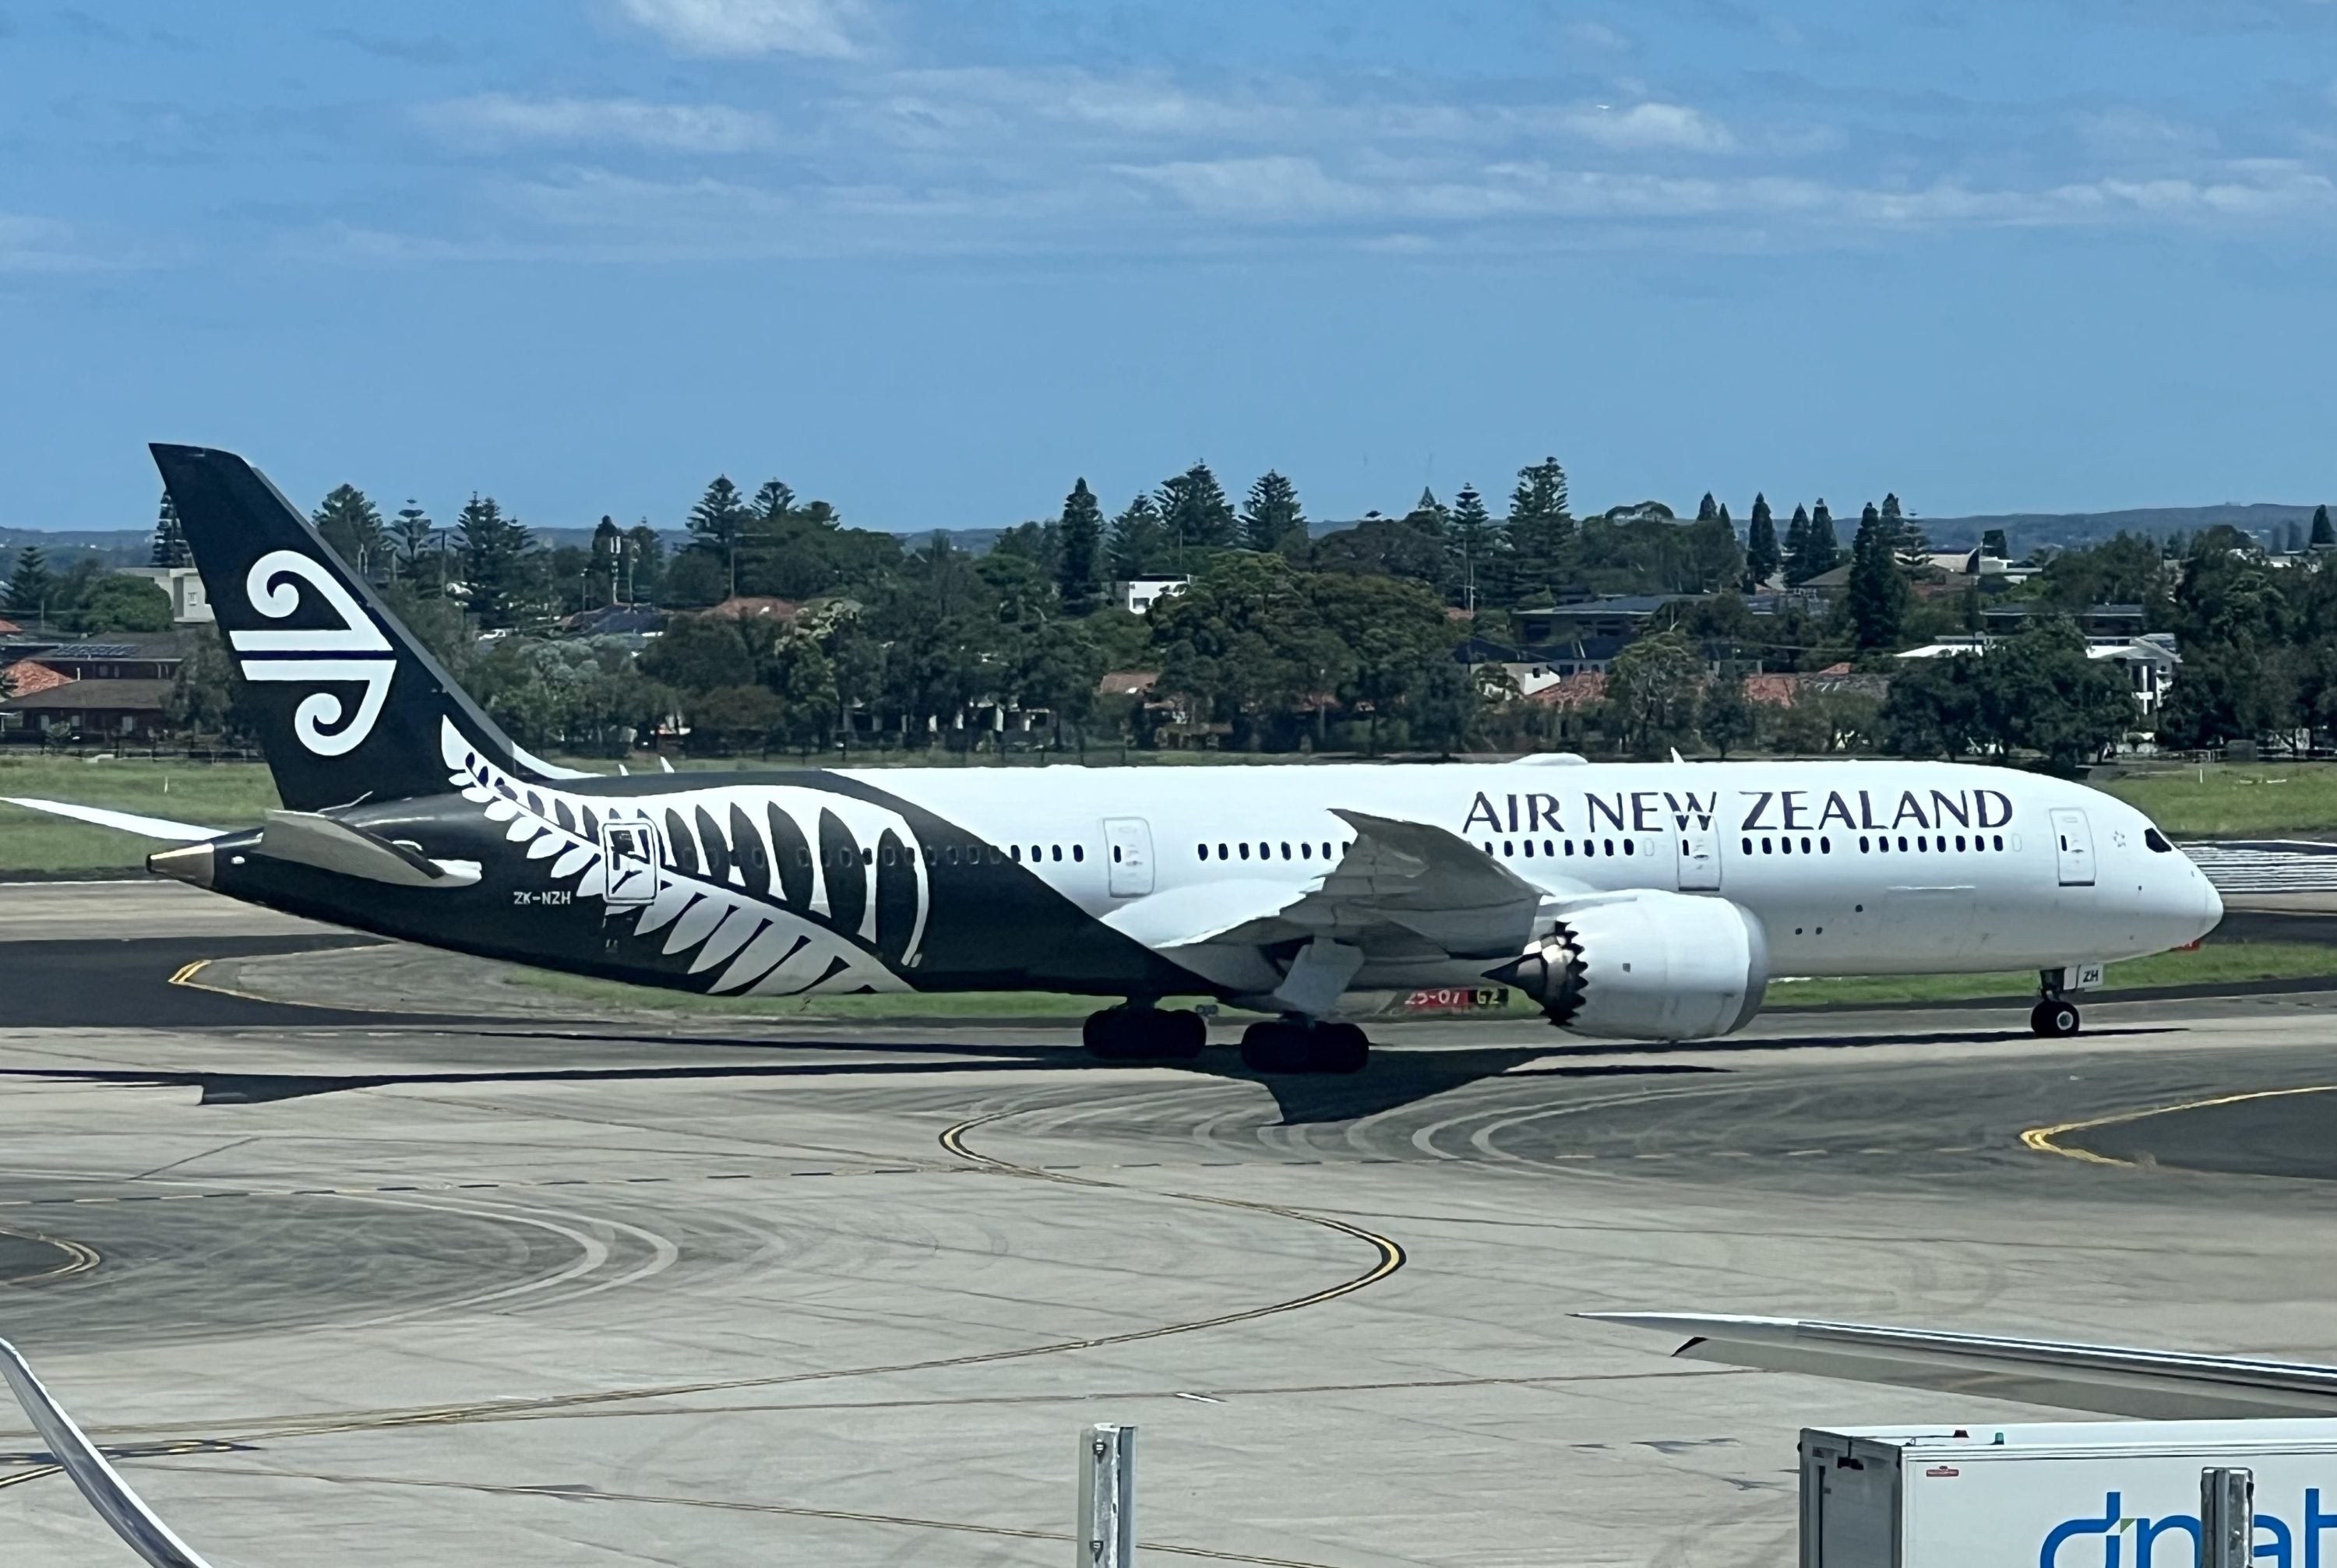 Air New Zealand Boeing 787 business class SYD views of Dreamliner